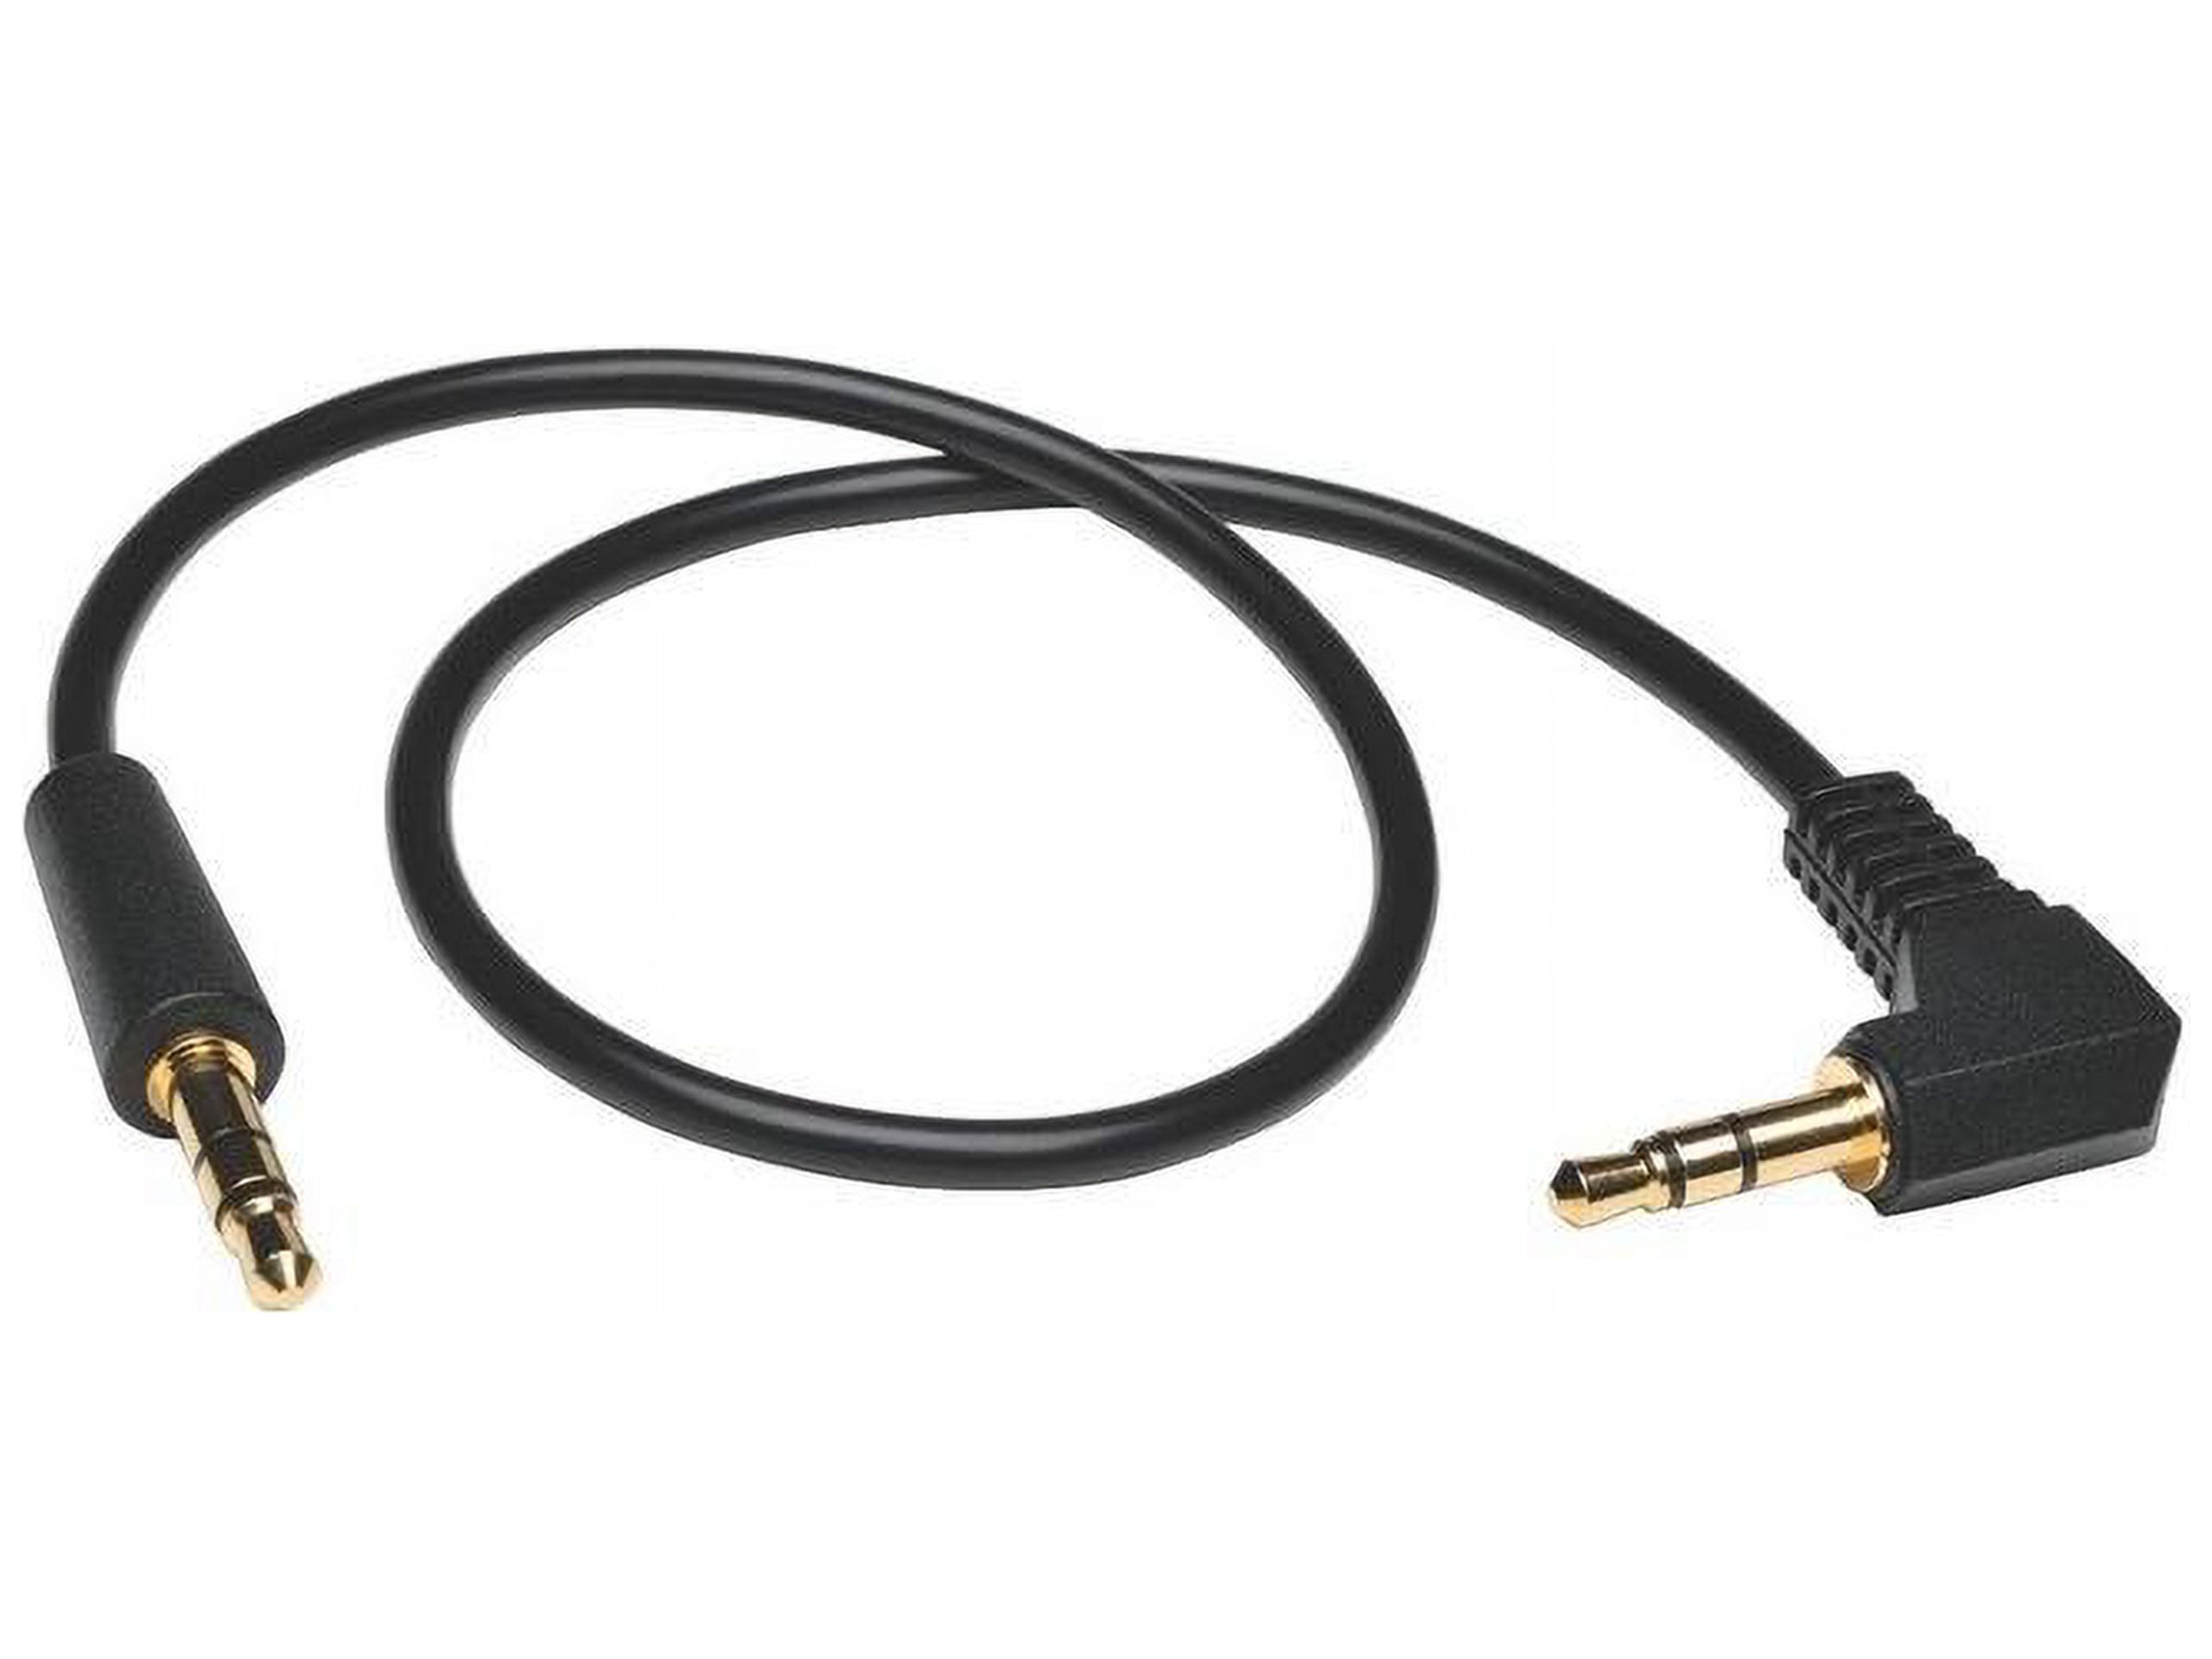 Tripp Lite P312-001-RA 1 Foot 3.5mm Mini Stereo Audio Cable with one Right Angle plug (M/M) - image 4 of 4